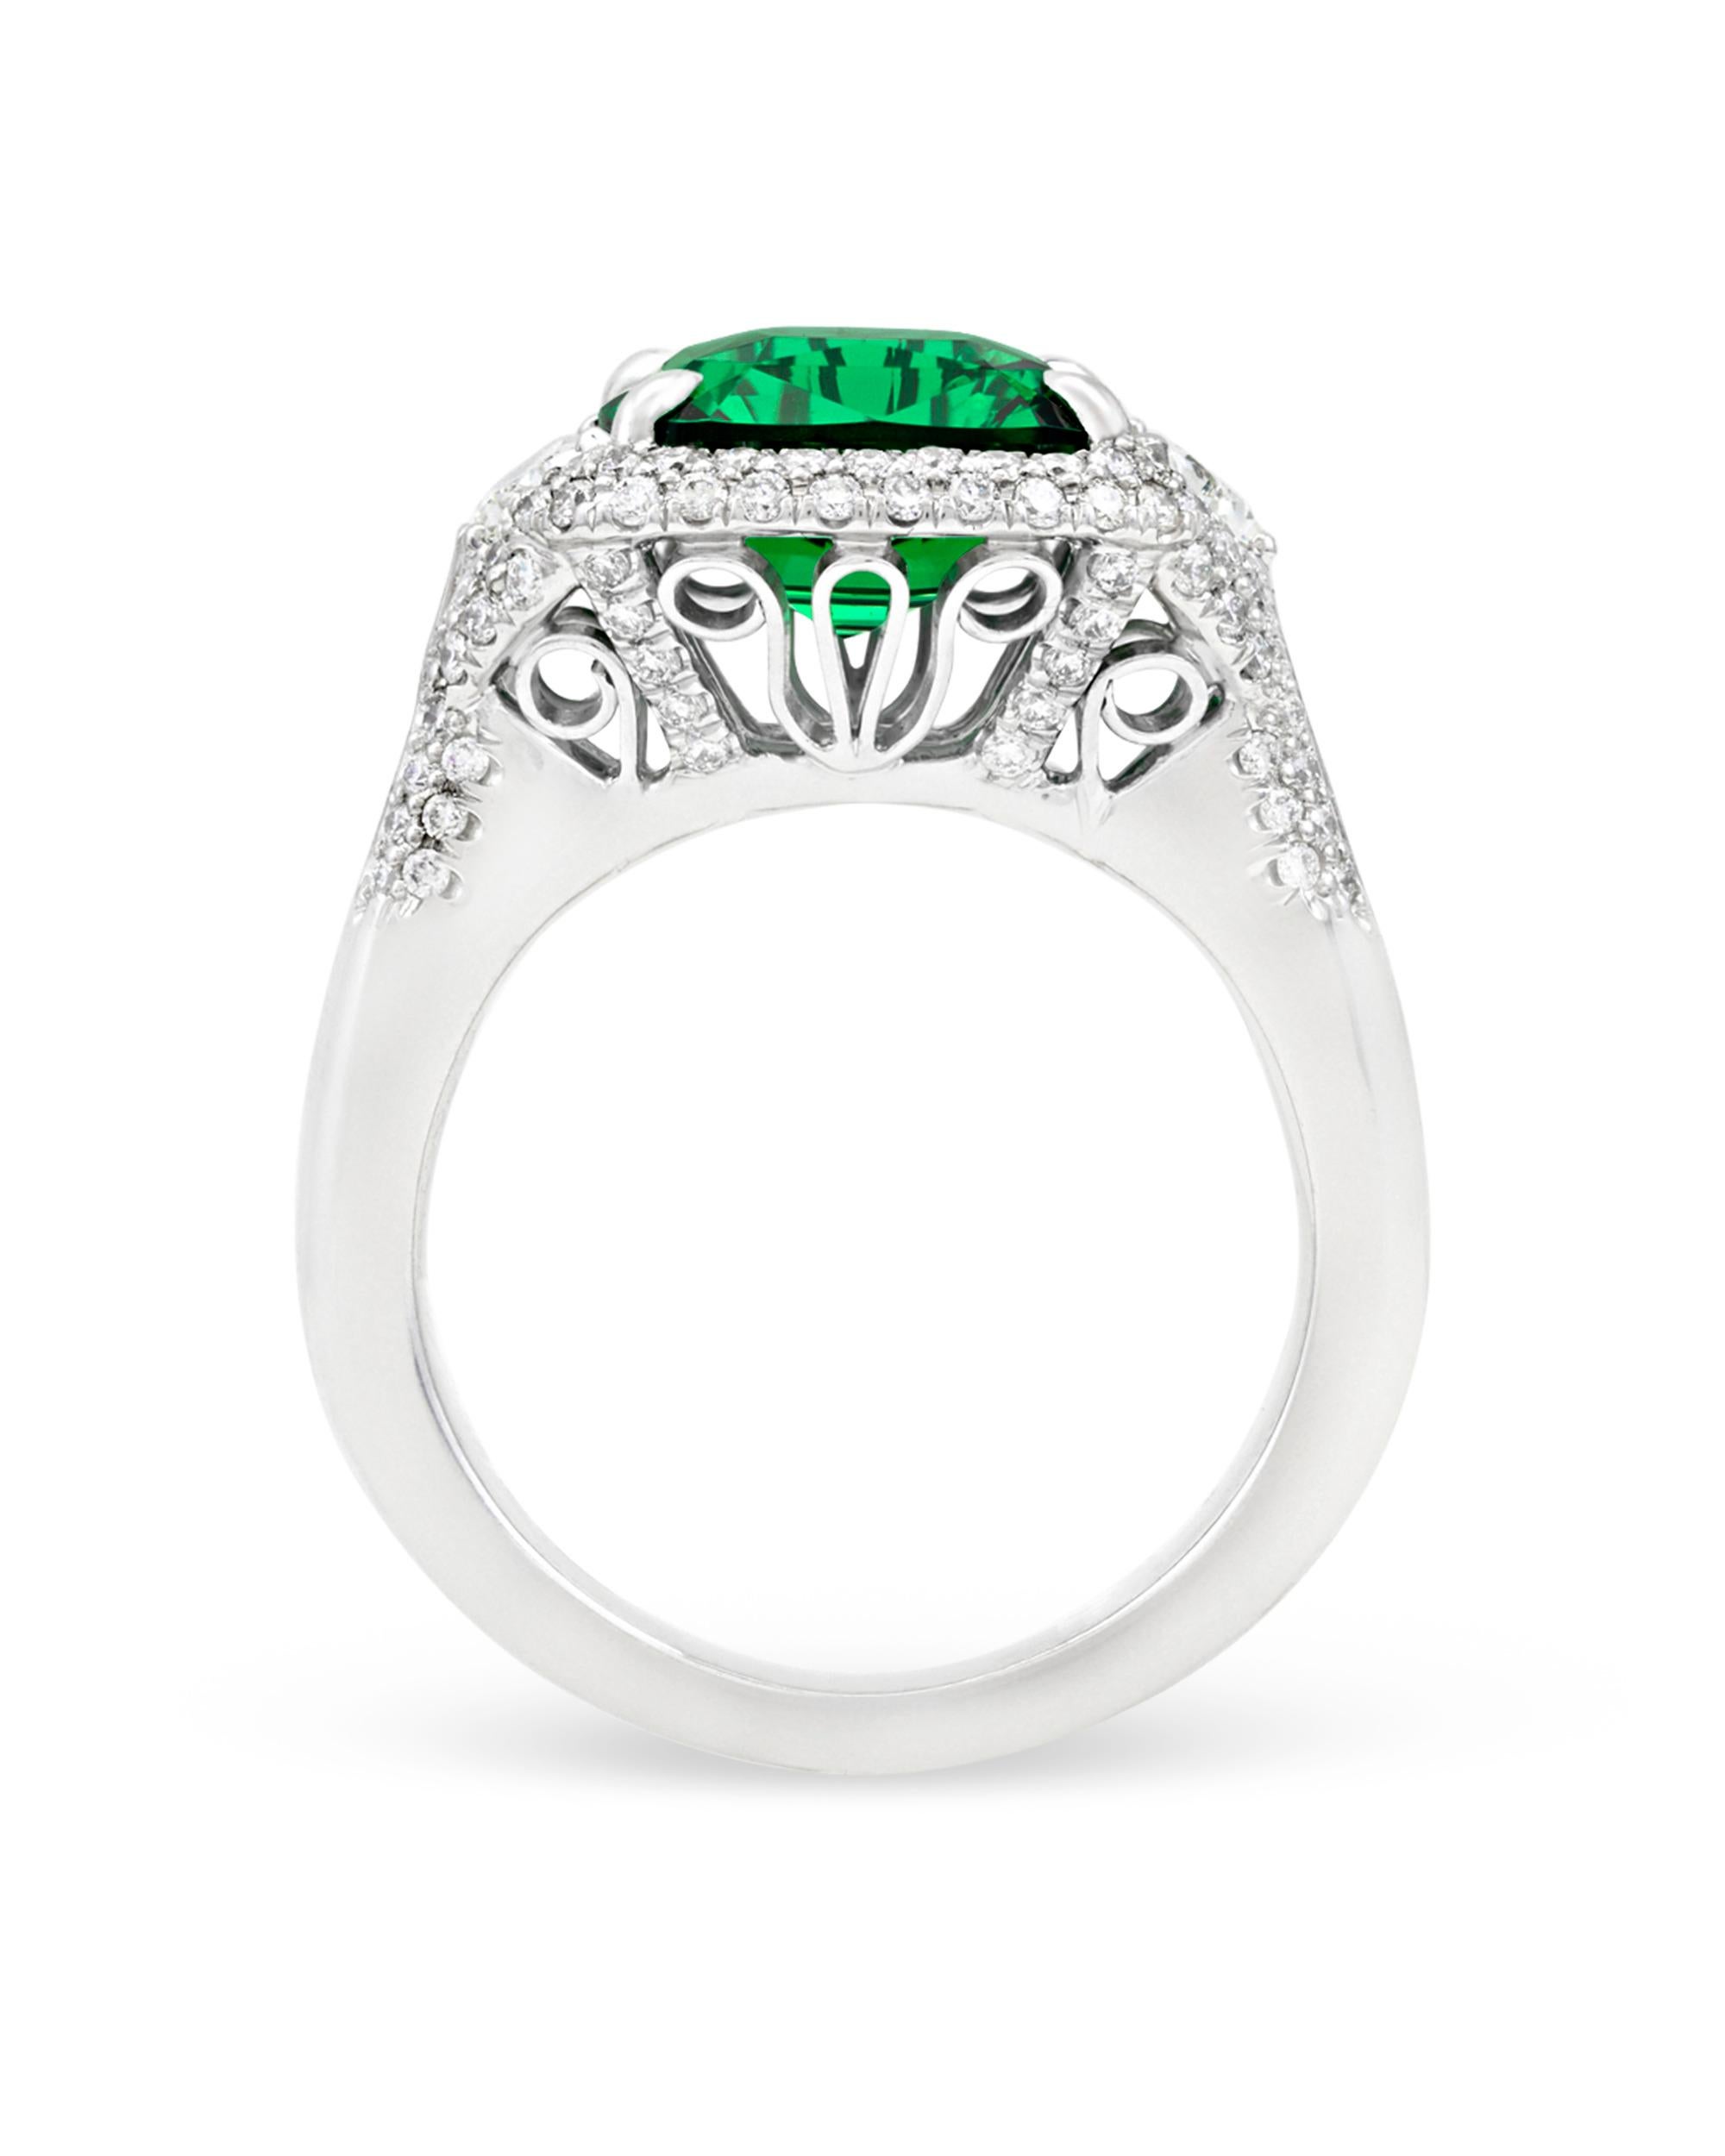 Prized for its rarity, luminosity and durability, the tsavorite garnet is truly a show-stopper of a gemstone. Weighing 5.12 carats, this example is among the best of its kind, exhibiting the perfect intense emerald green hue found only in the finest